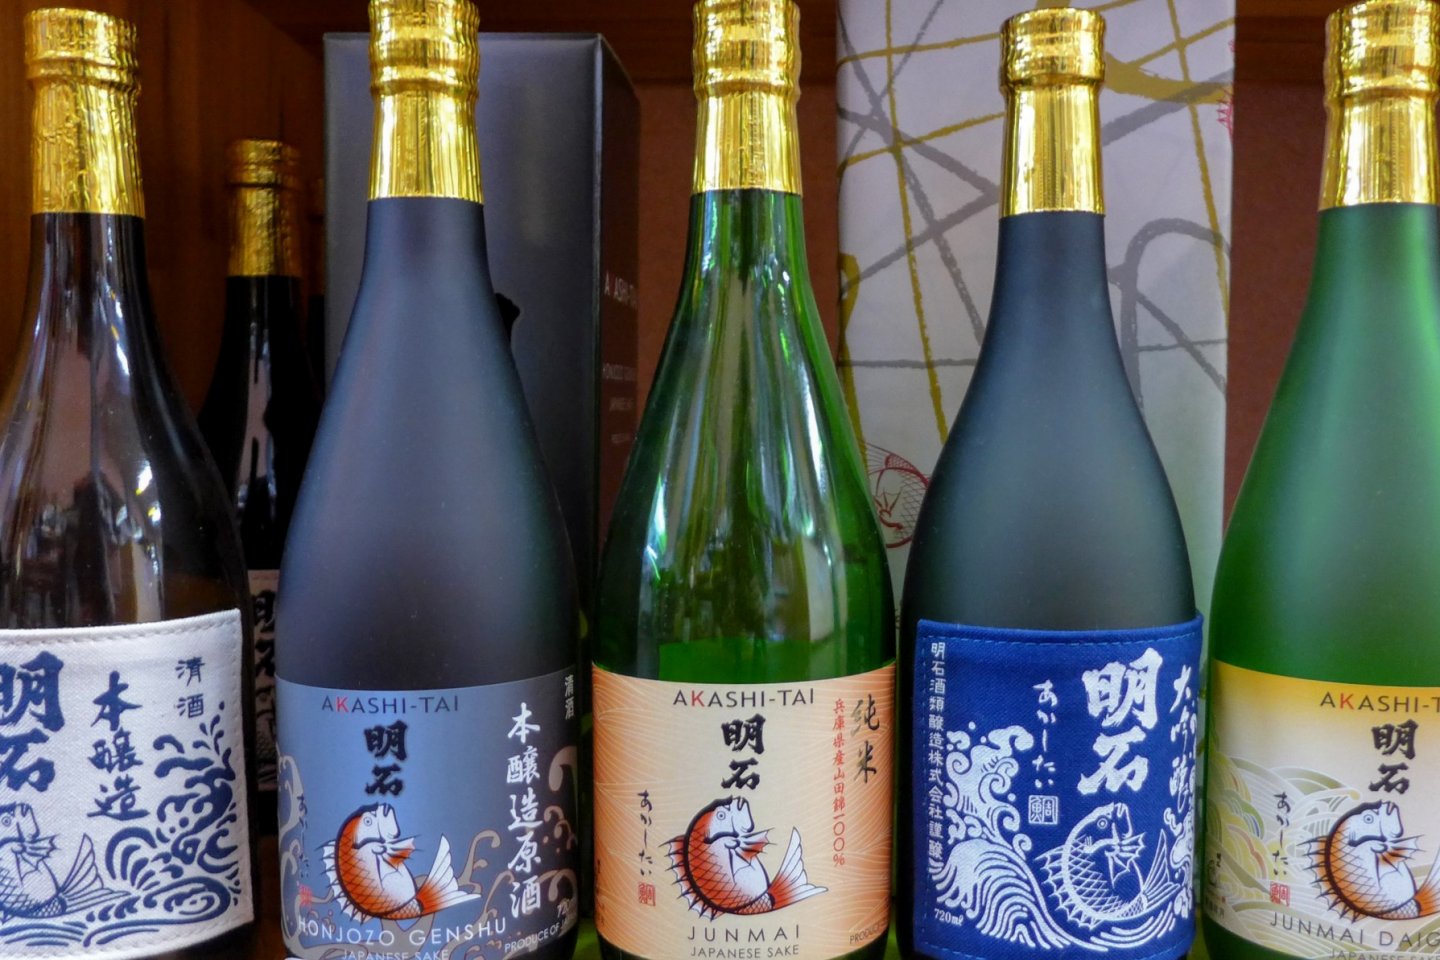 Sake is made from 4 simple ingredients